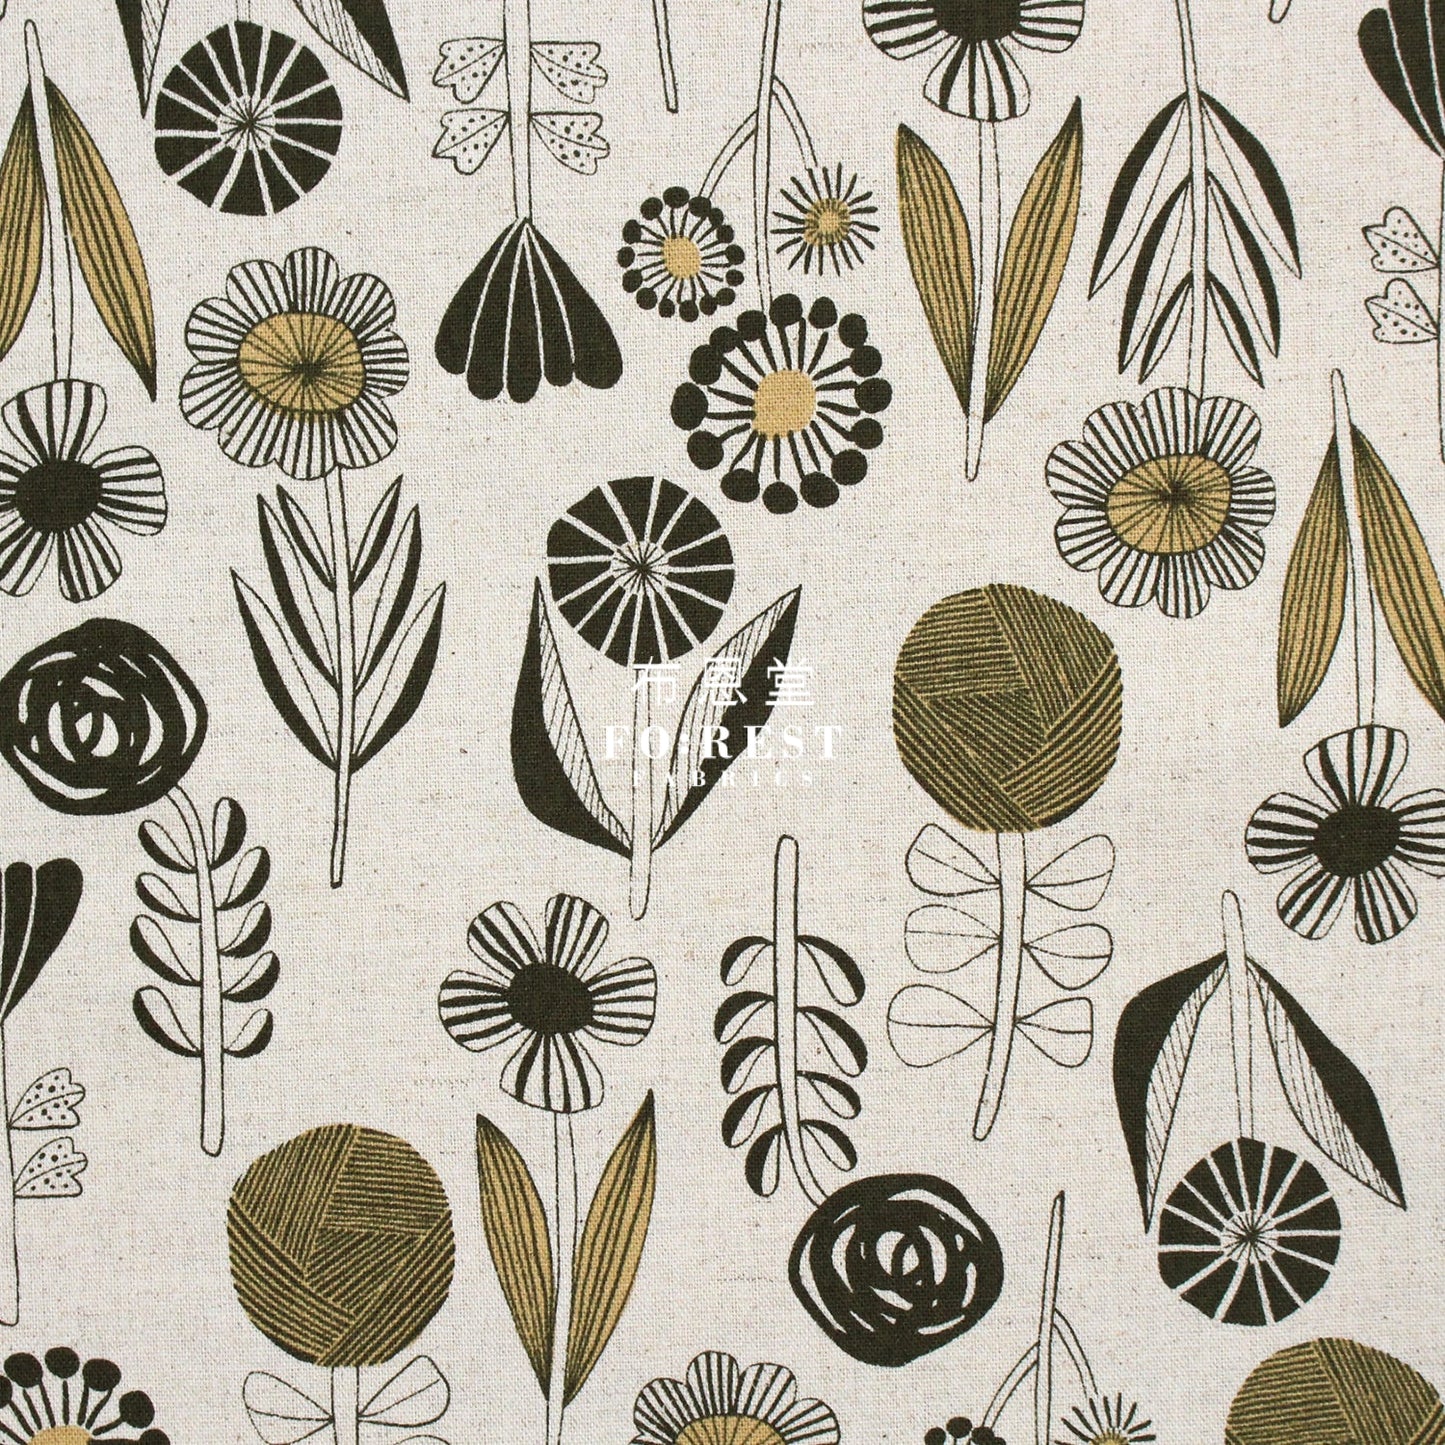 Cotton Linen - Bloom By Bookhou Flower Fabric A Fabric